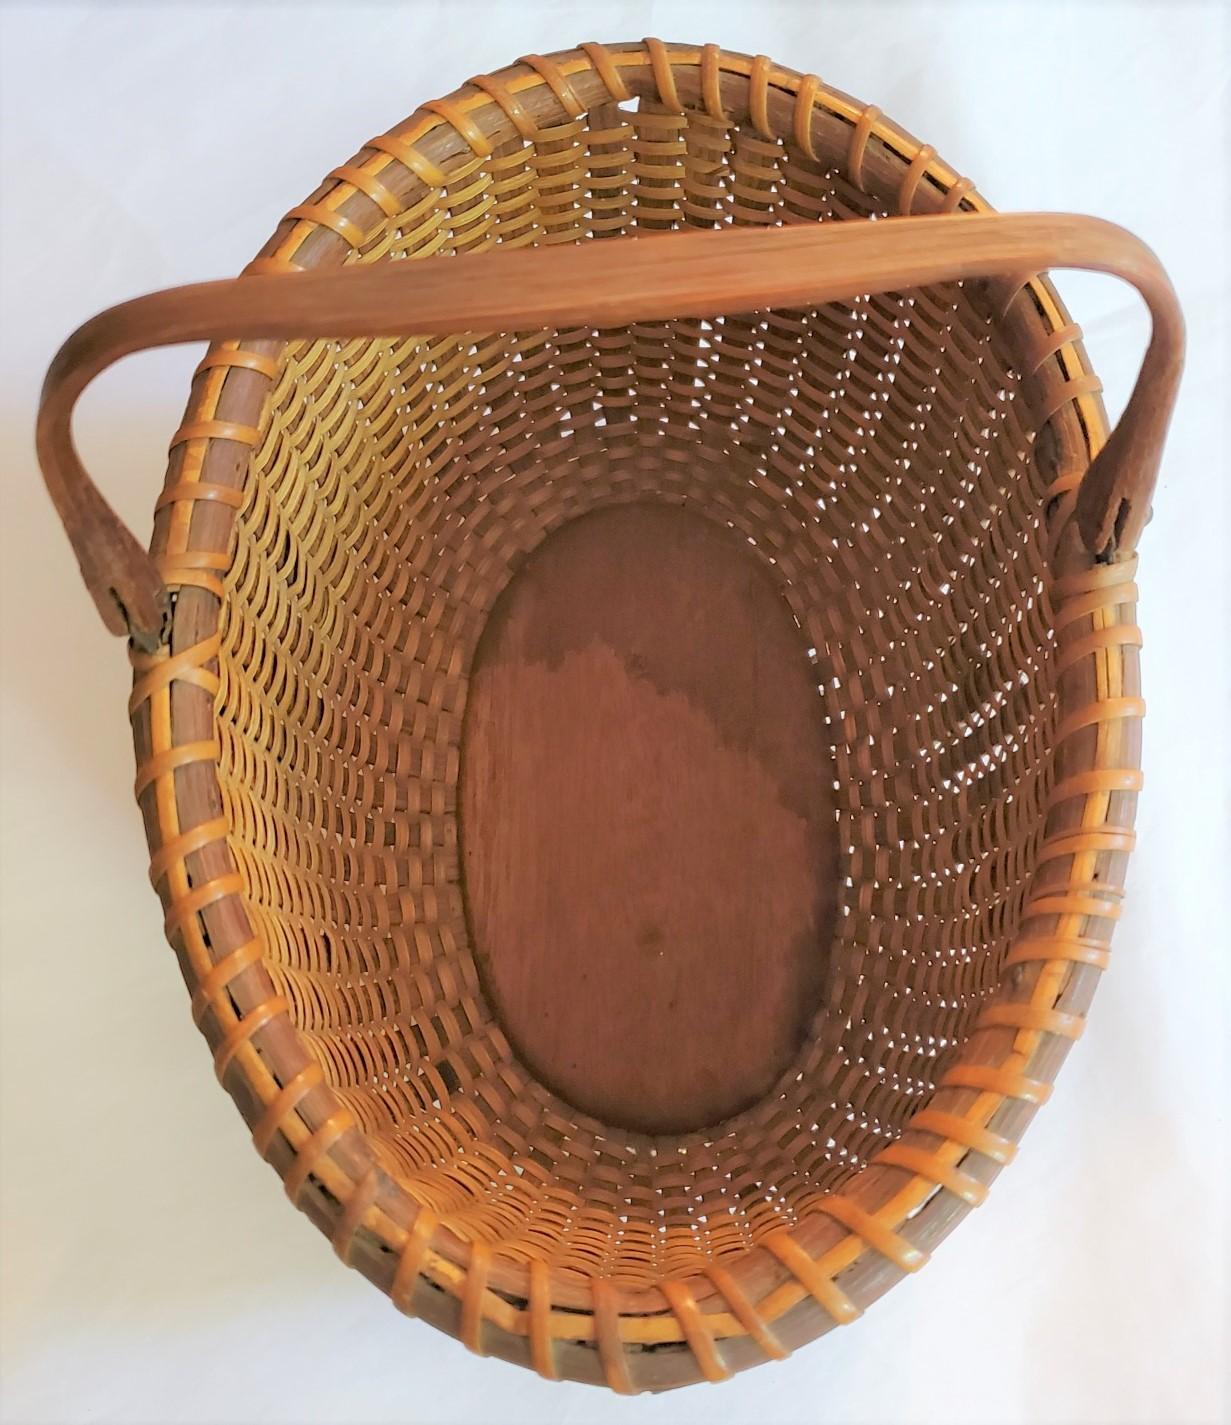 Cane Early 20th Century Nantucket Oval Basket by A.D. Williams, circa 1920